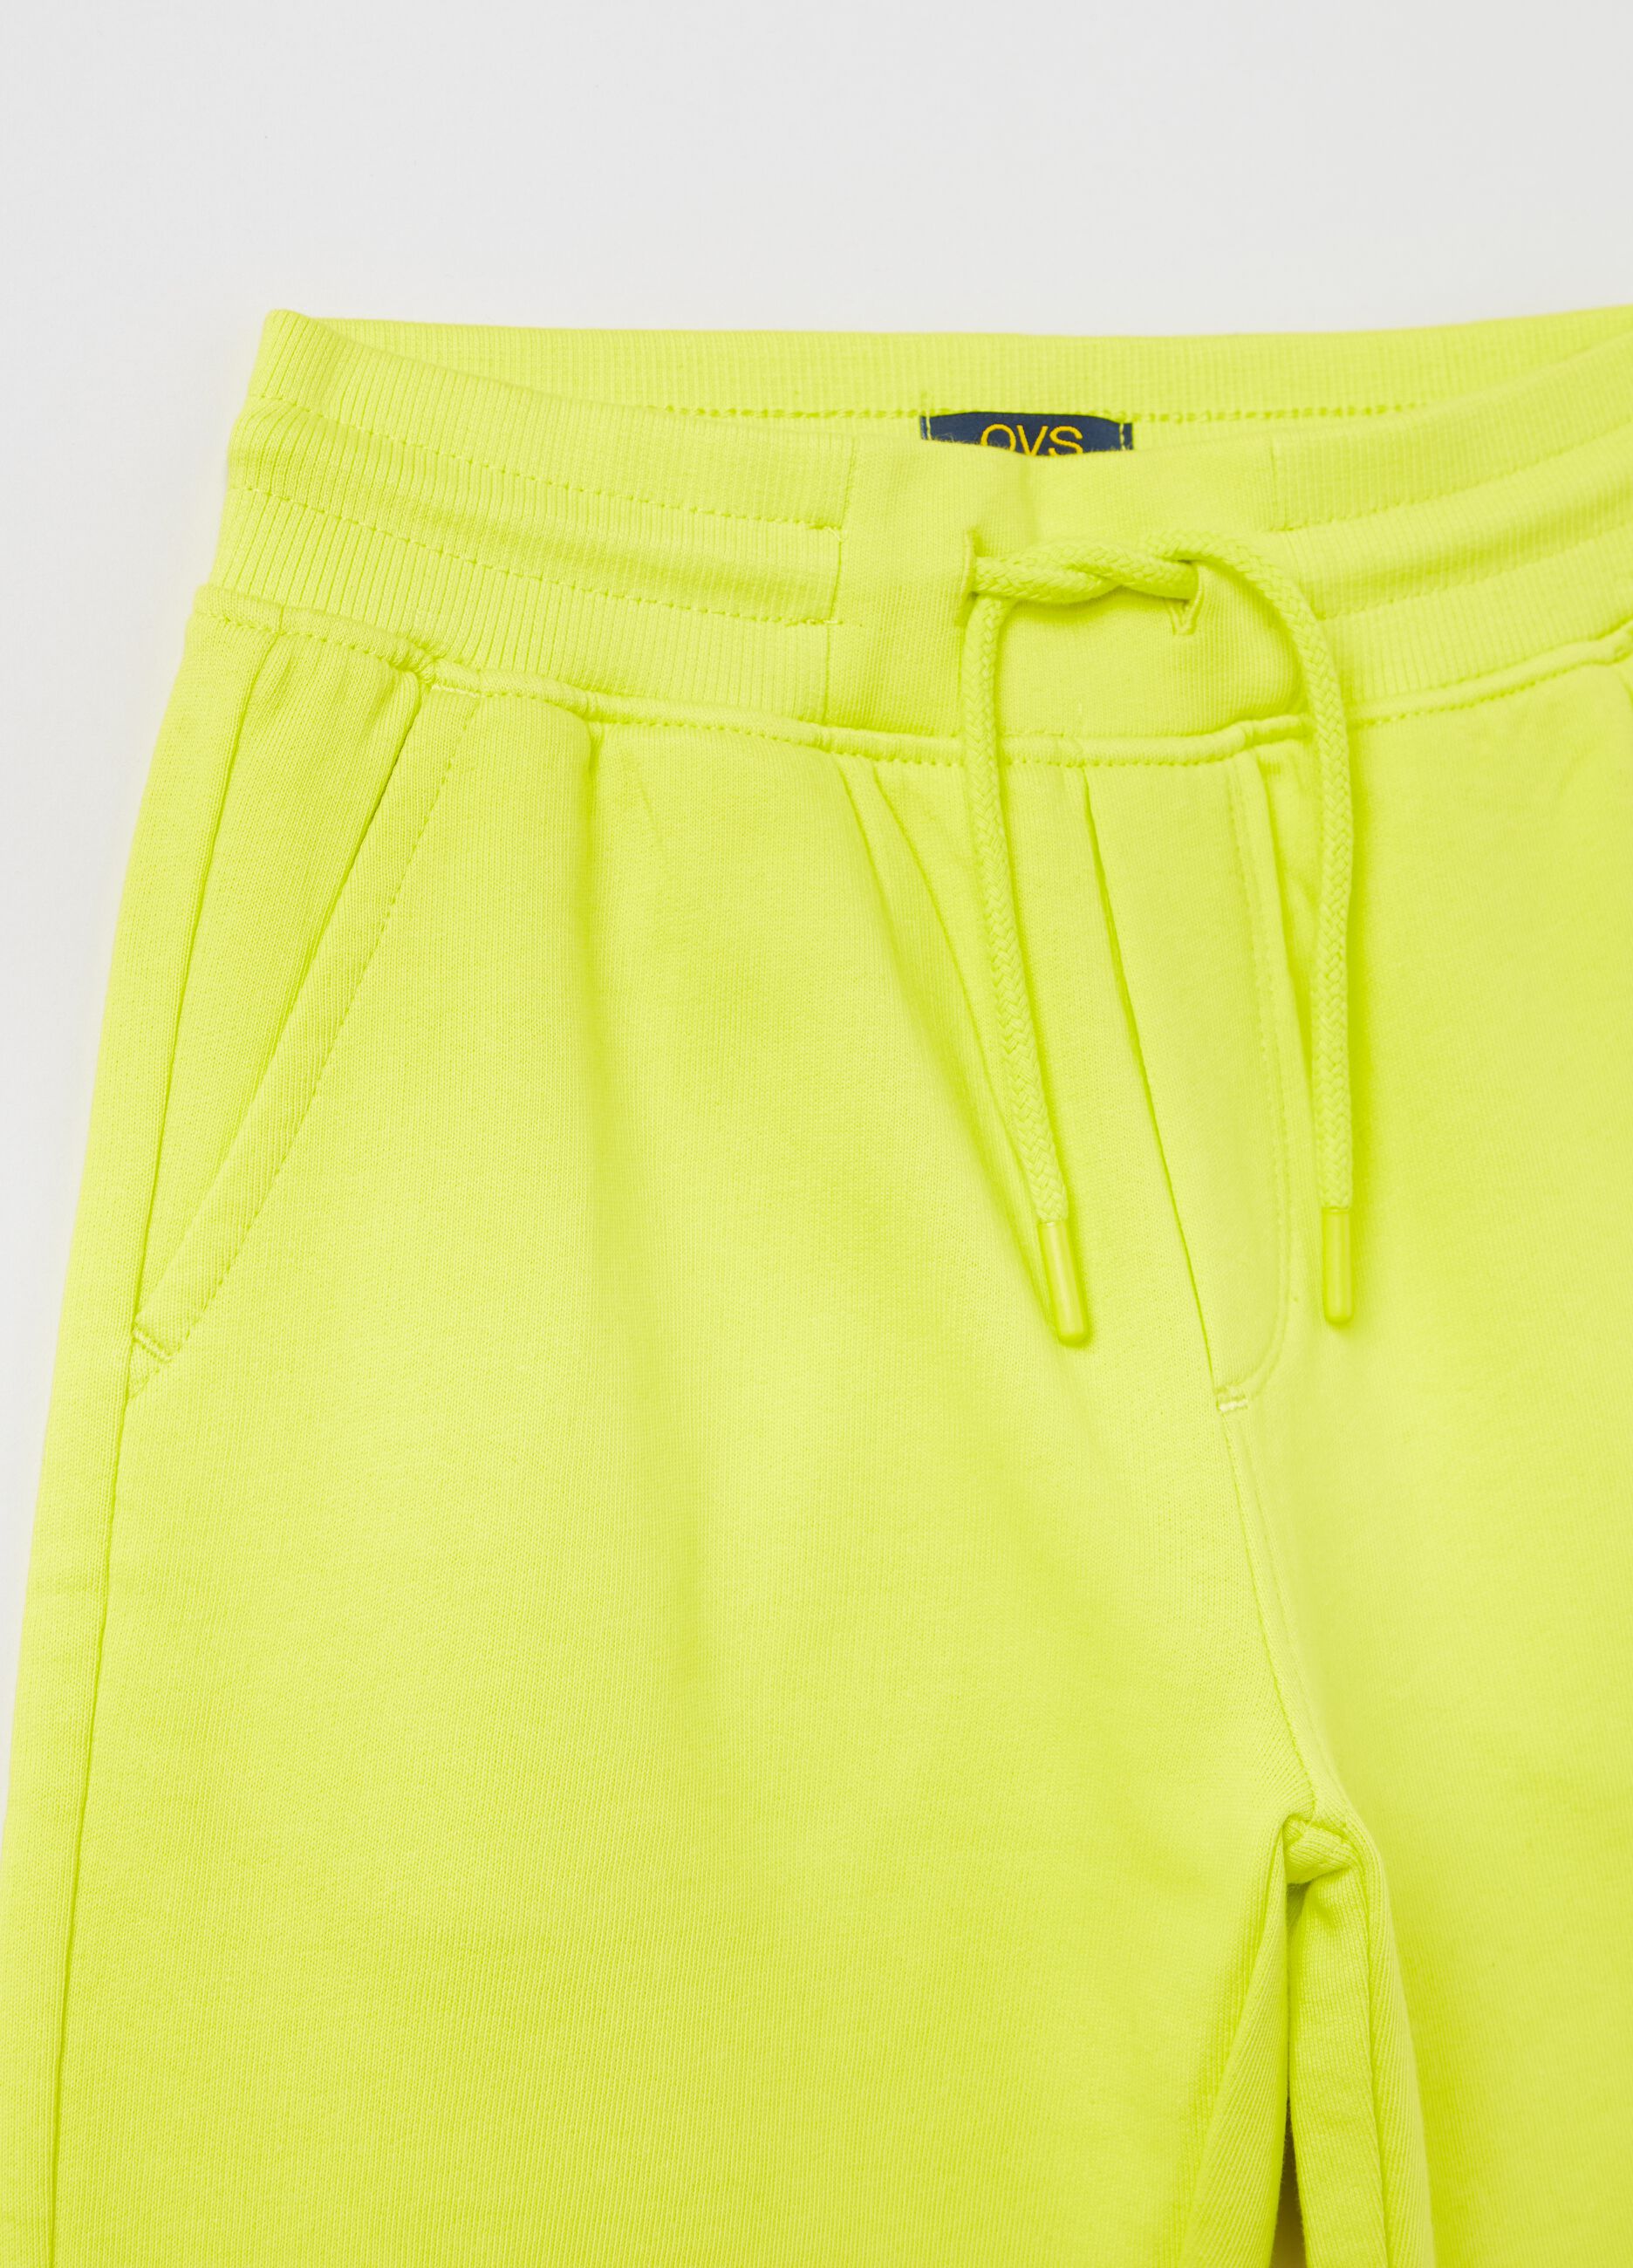 Shorts Fitness in cotone con coulisse